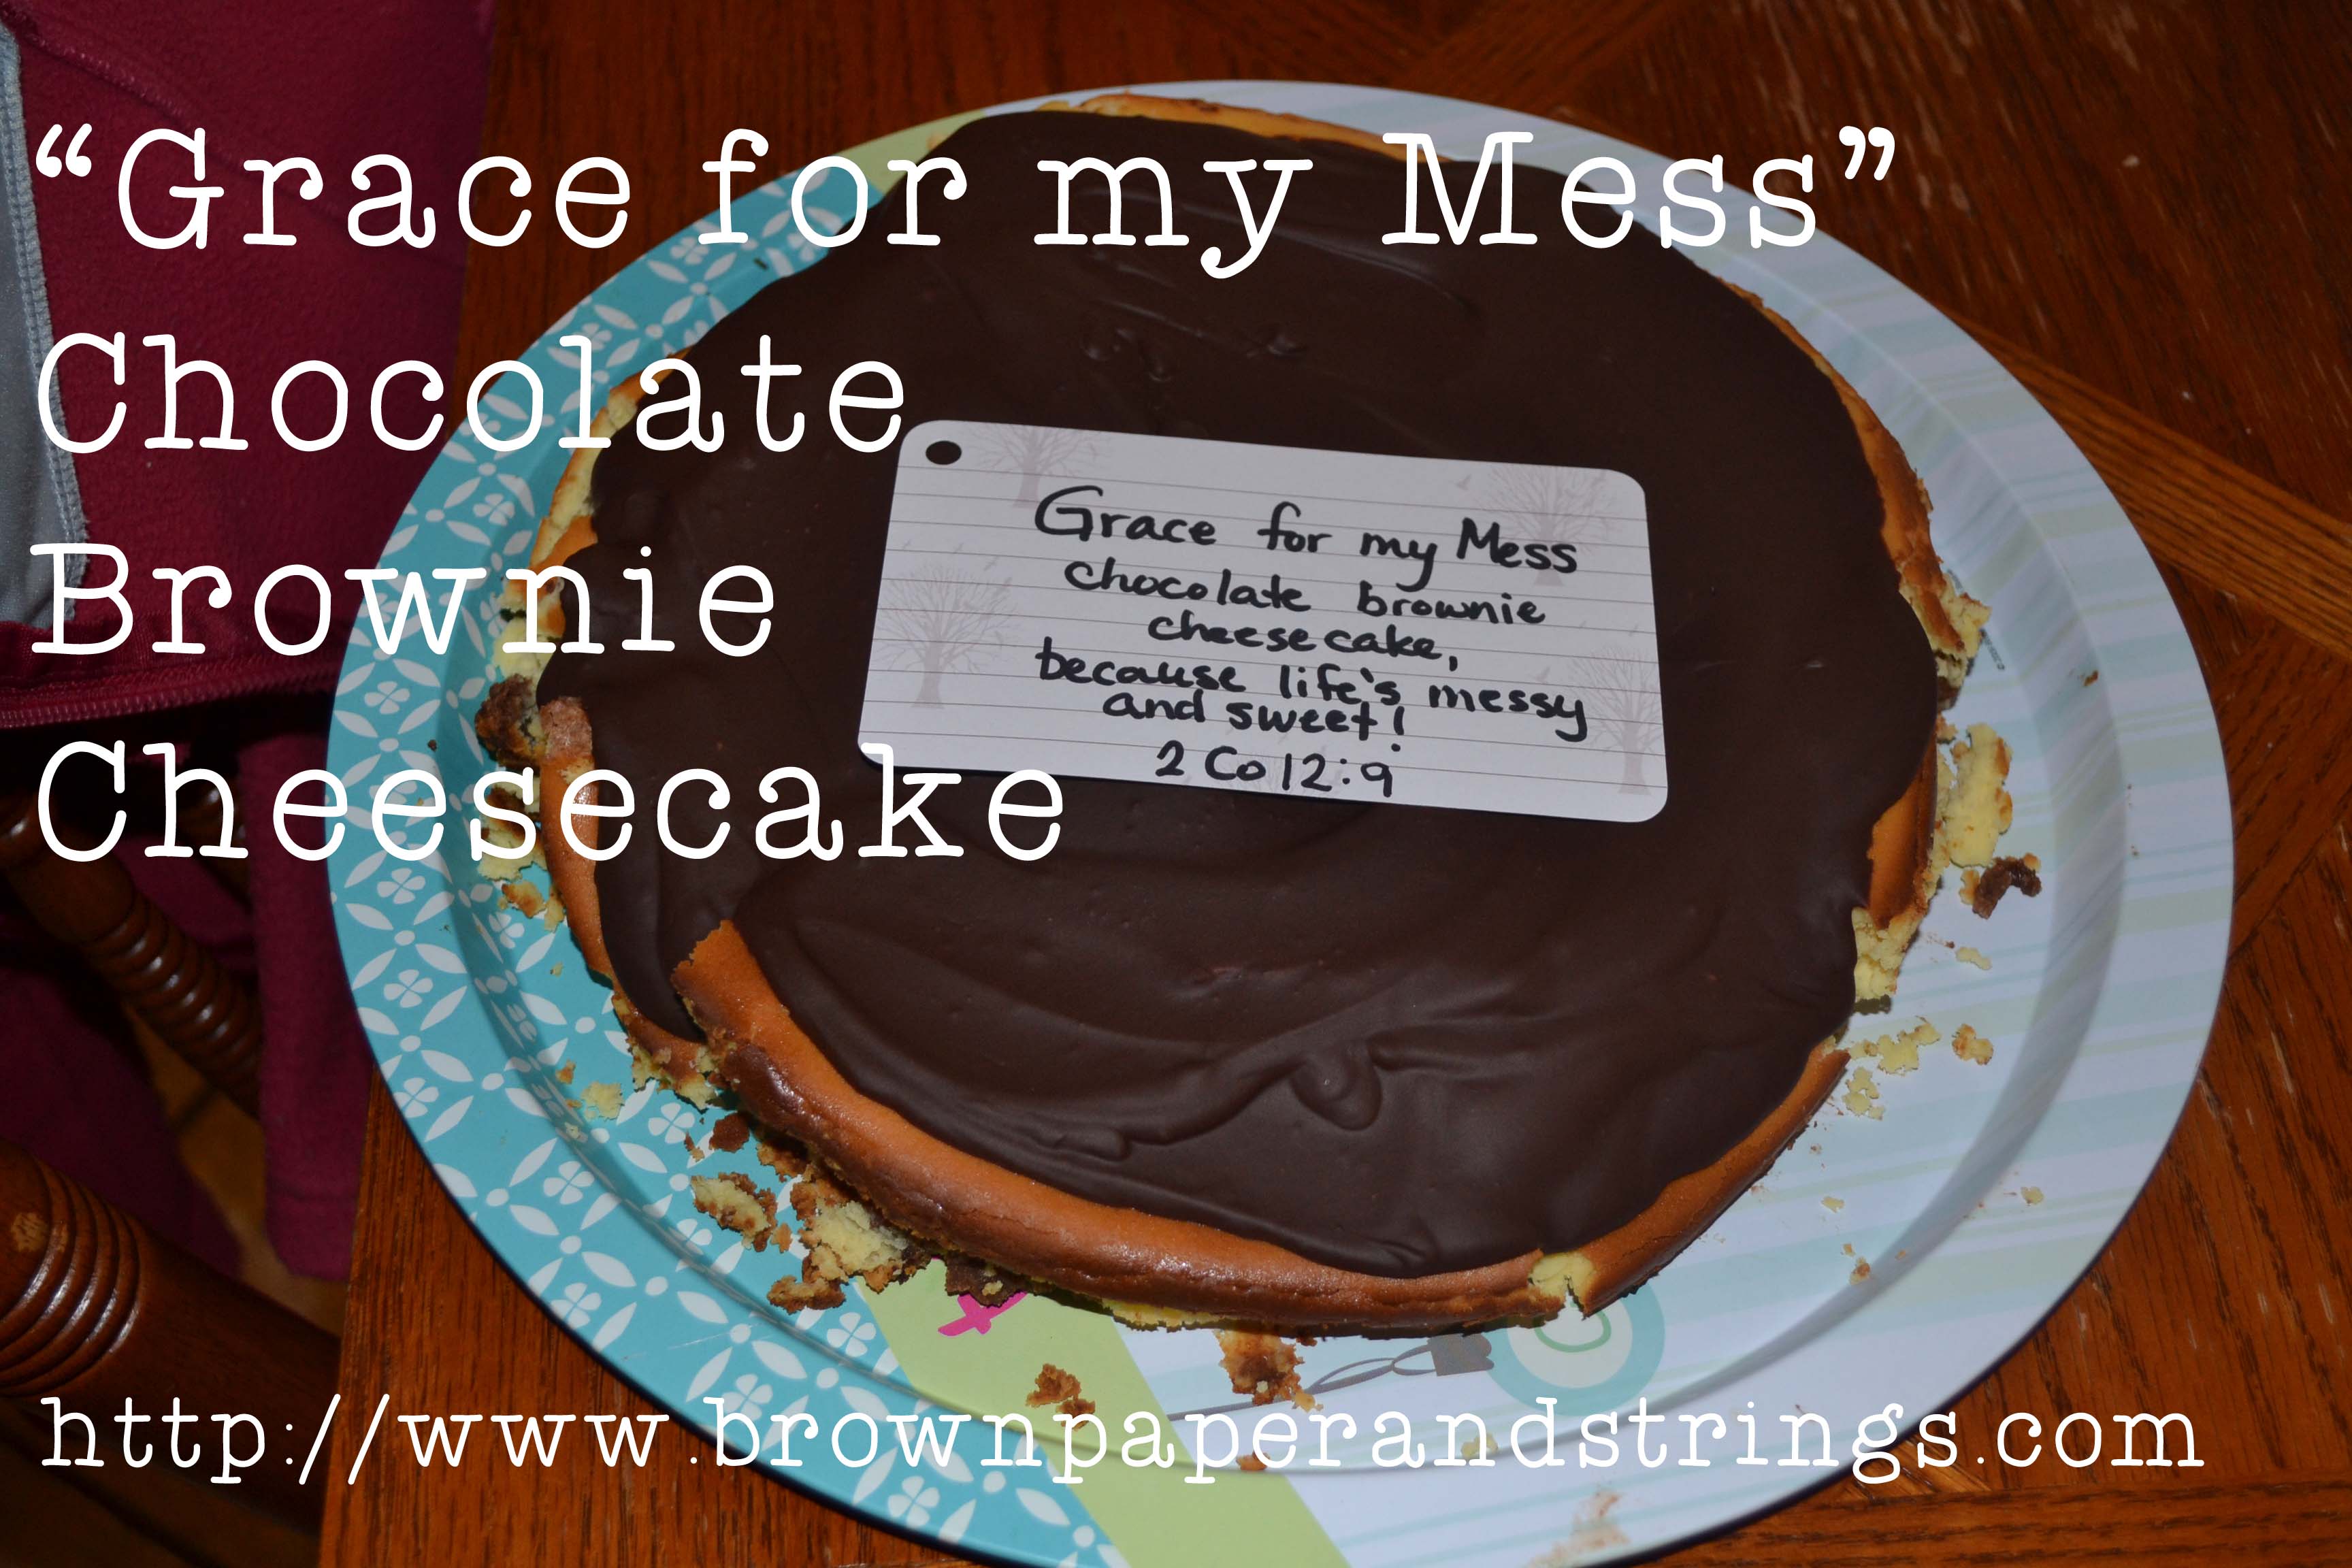 Grace for my Mess Chocolate Brownie Cheesecake